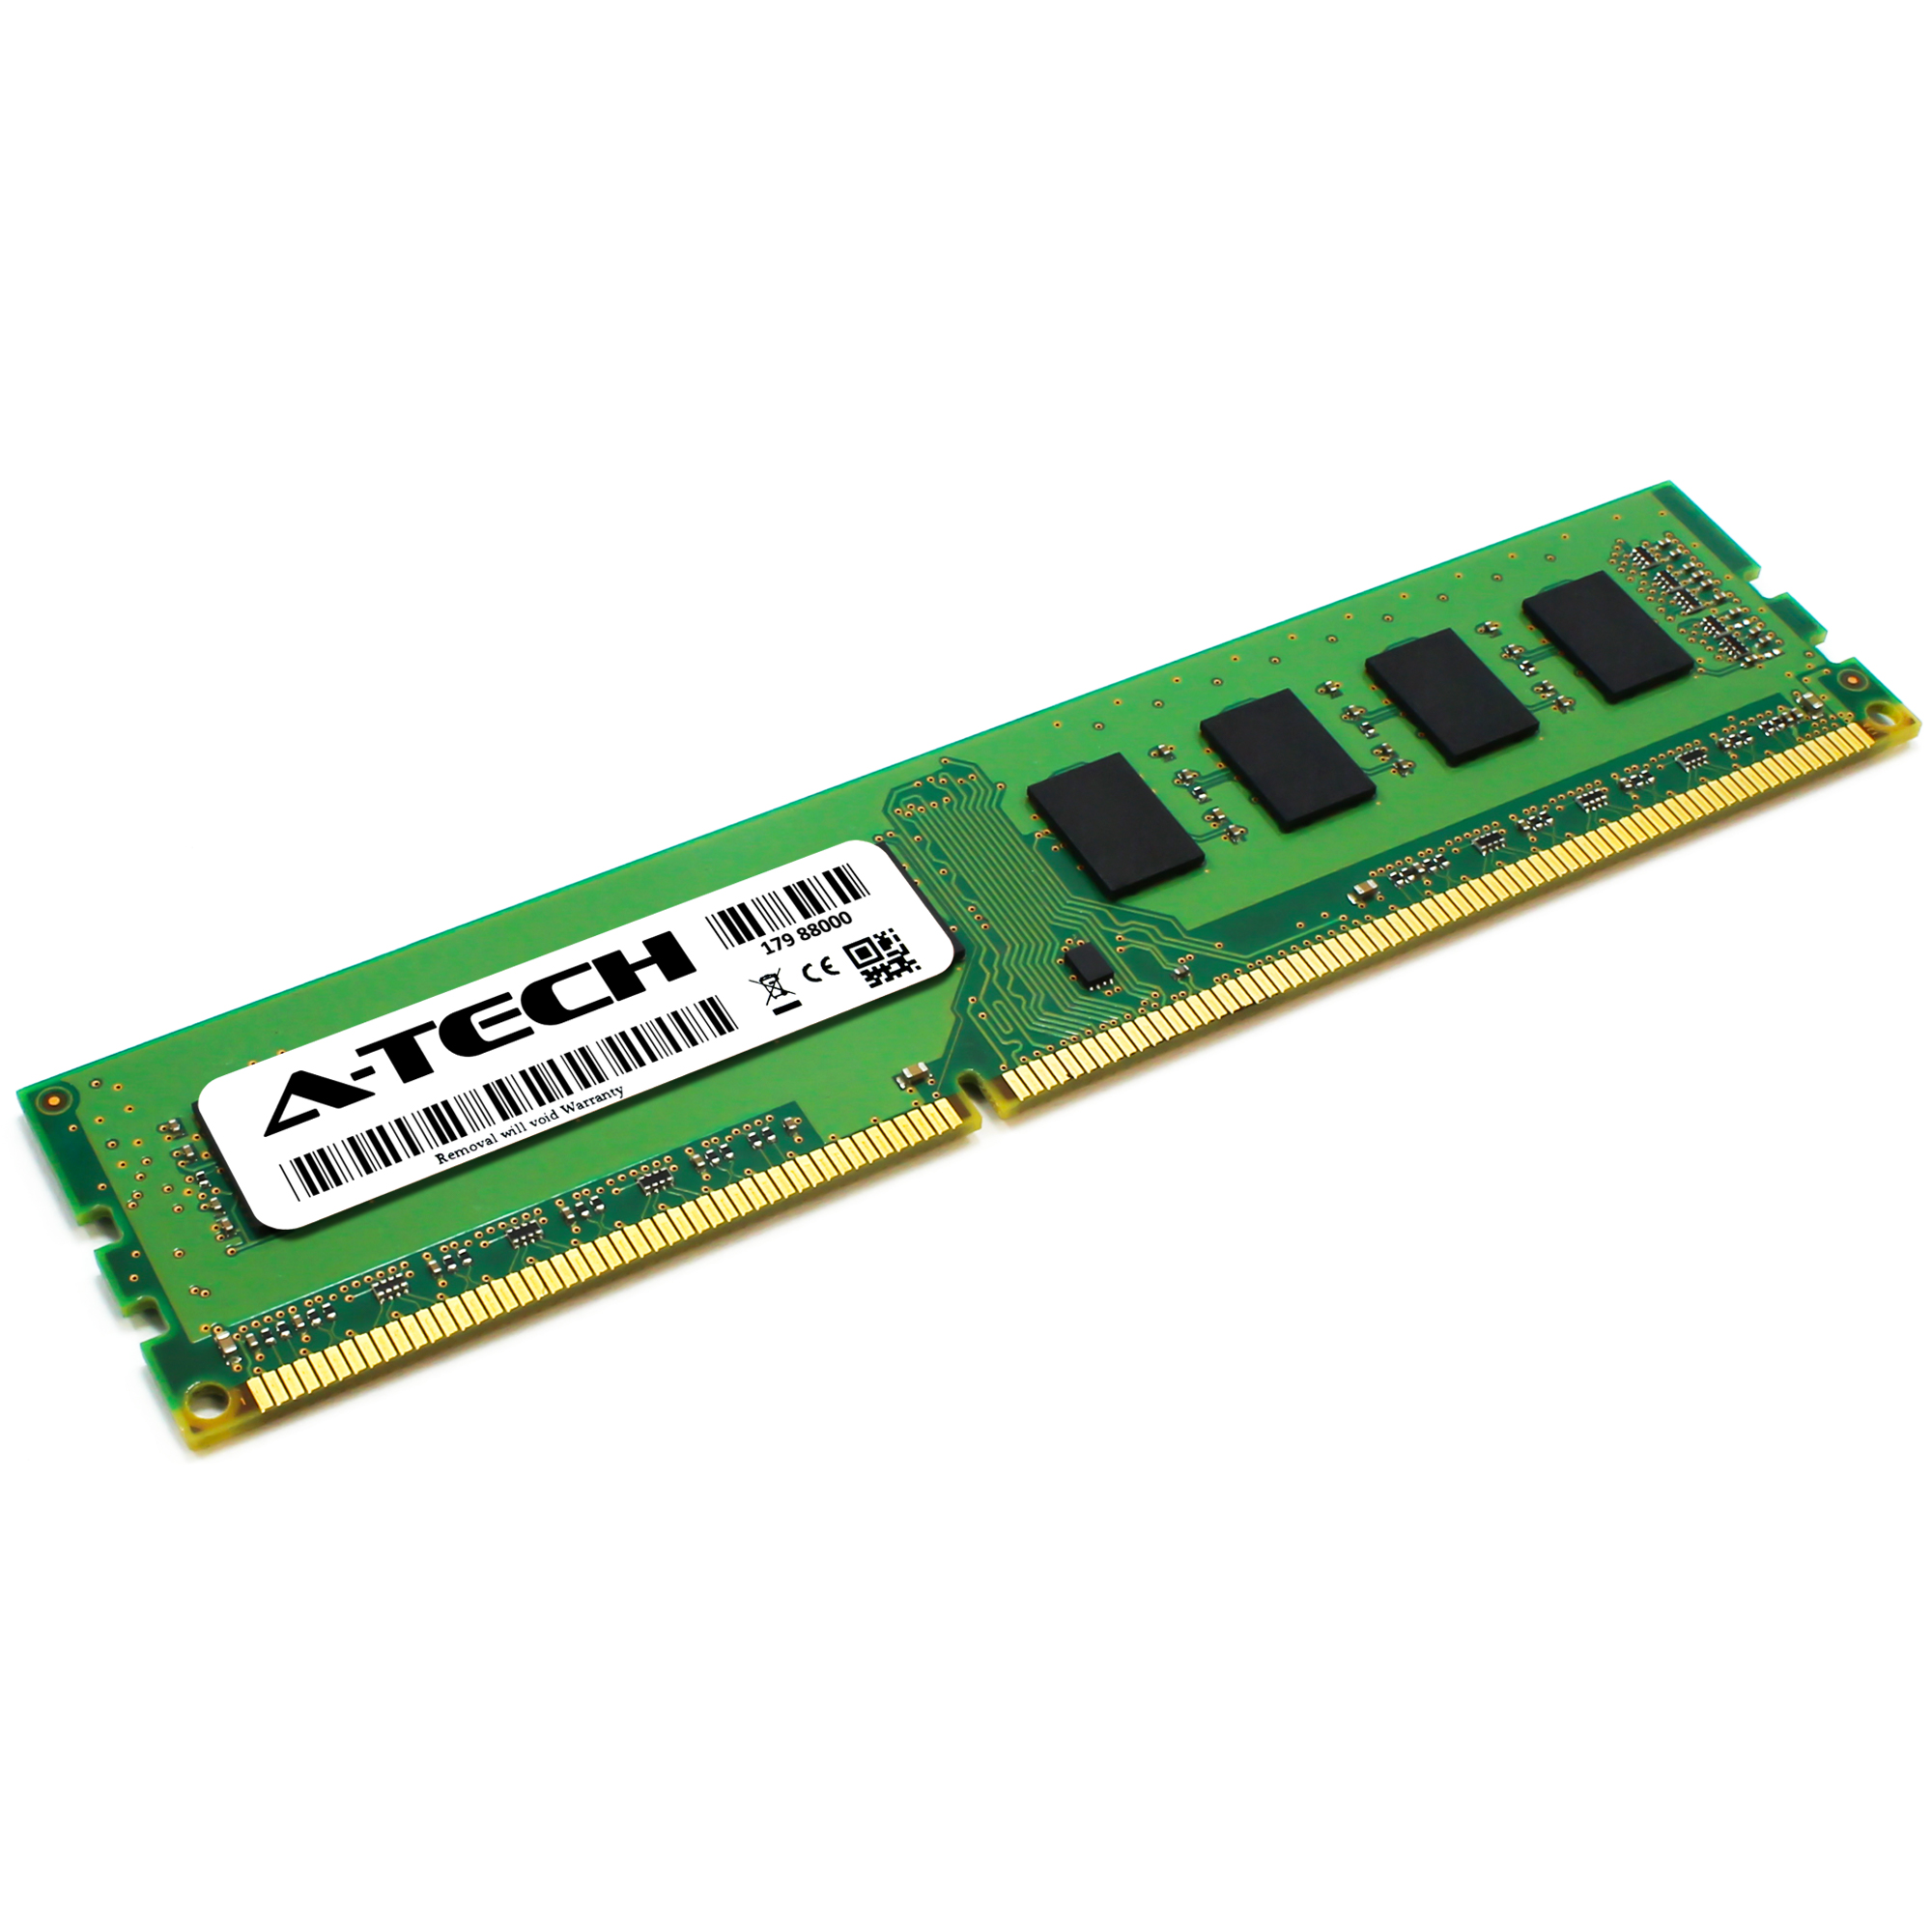 2GB PC3-10600 DDR3 1333 MHz Memory RAM for DELL XPS 8300 | eBay